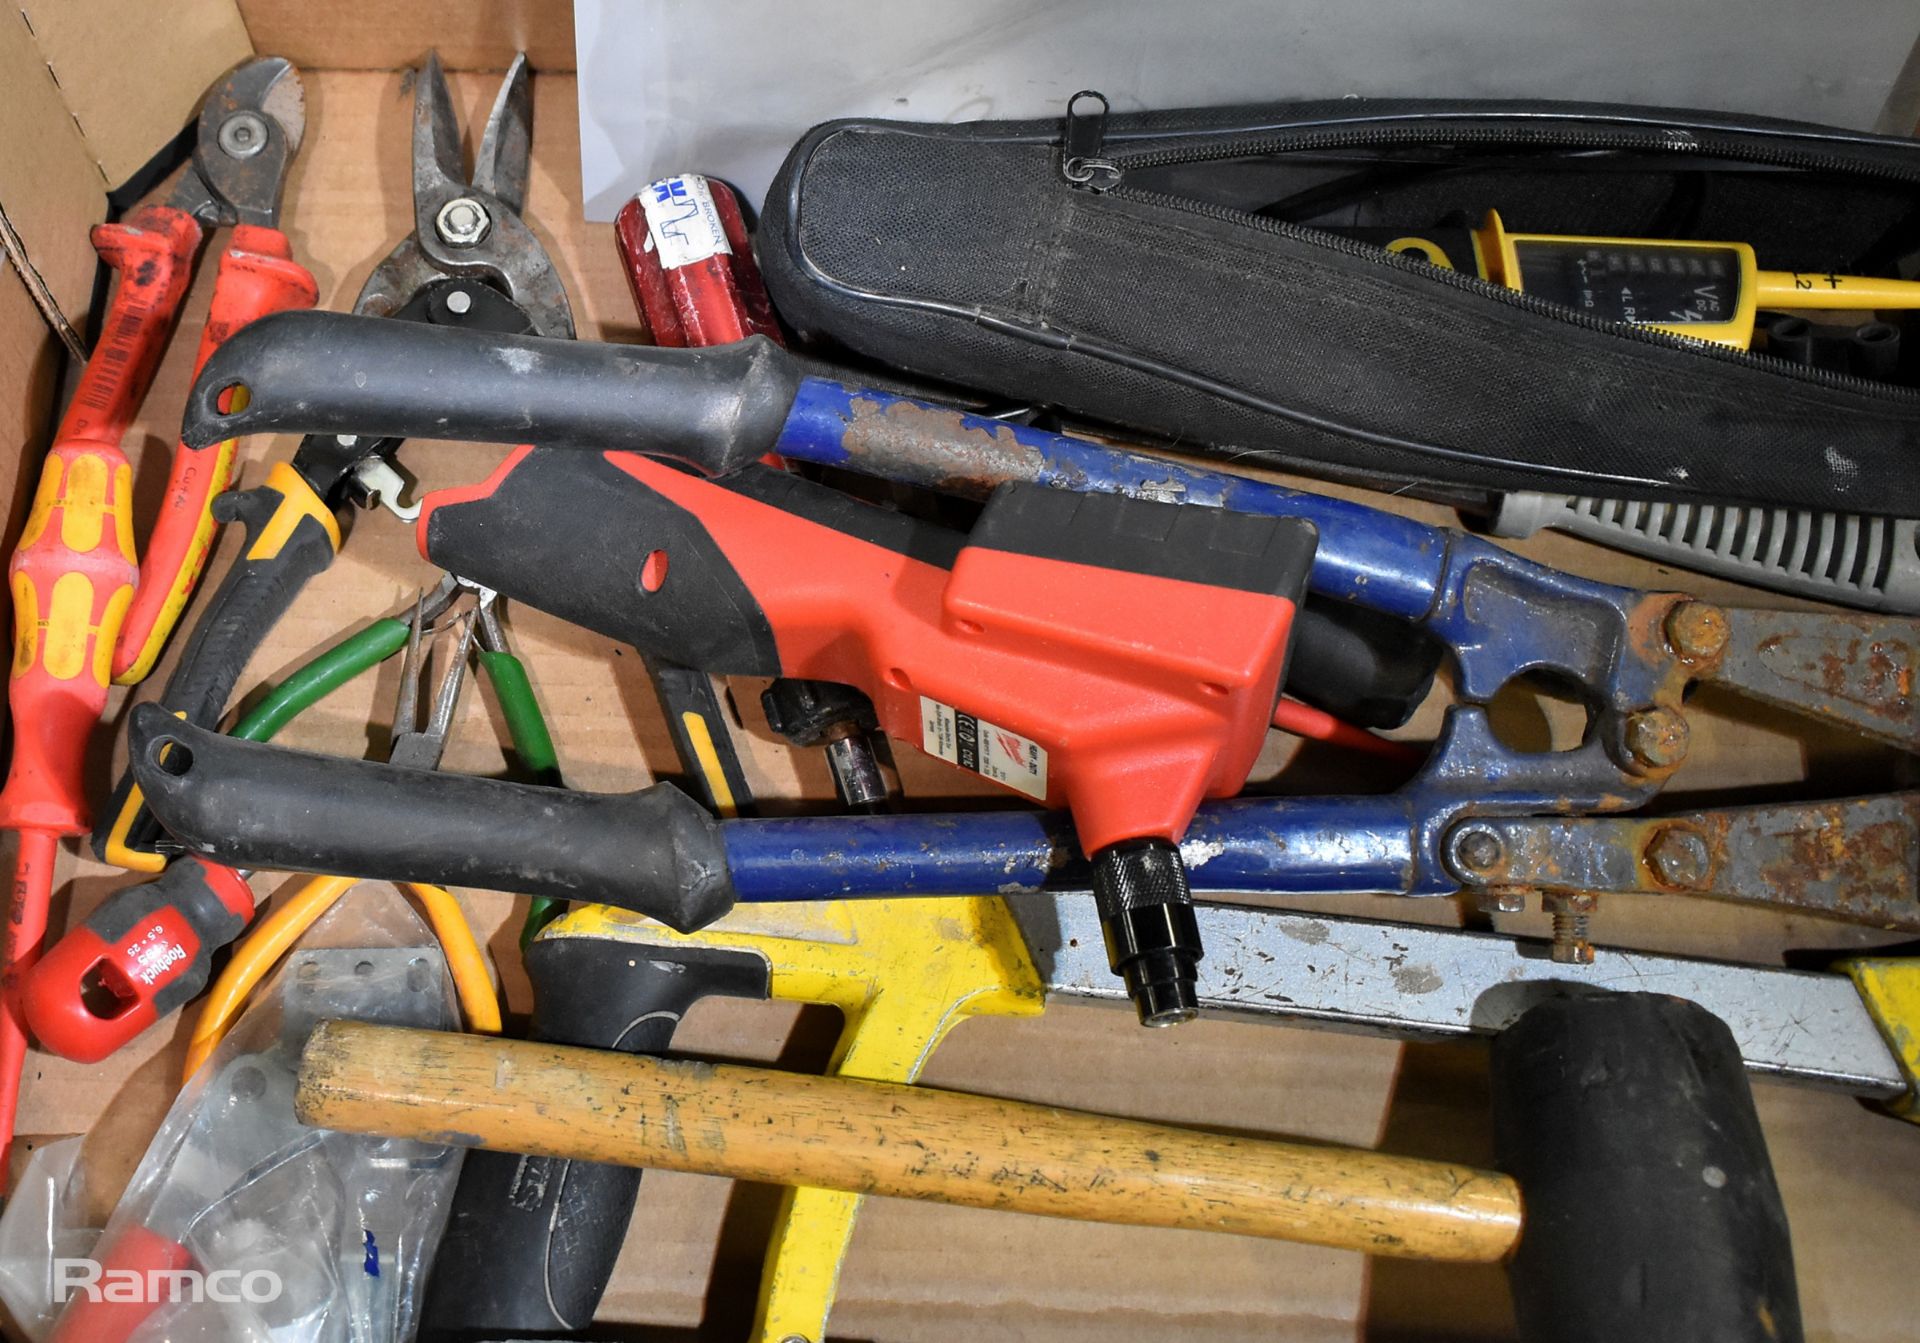 Hand tools - Saw, pliers, cutters, metal snips, bolt cutter, mallet, circuit tester, screwdrivers - Image 2 of 5